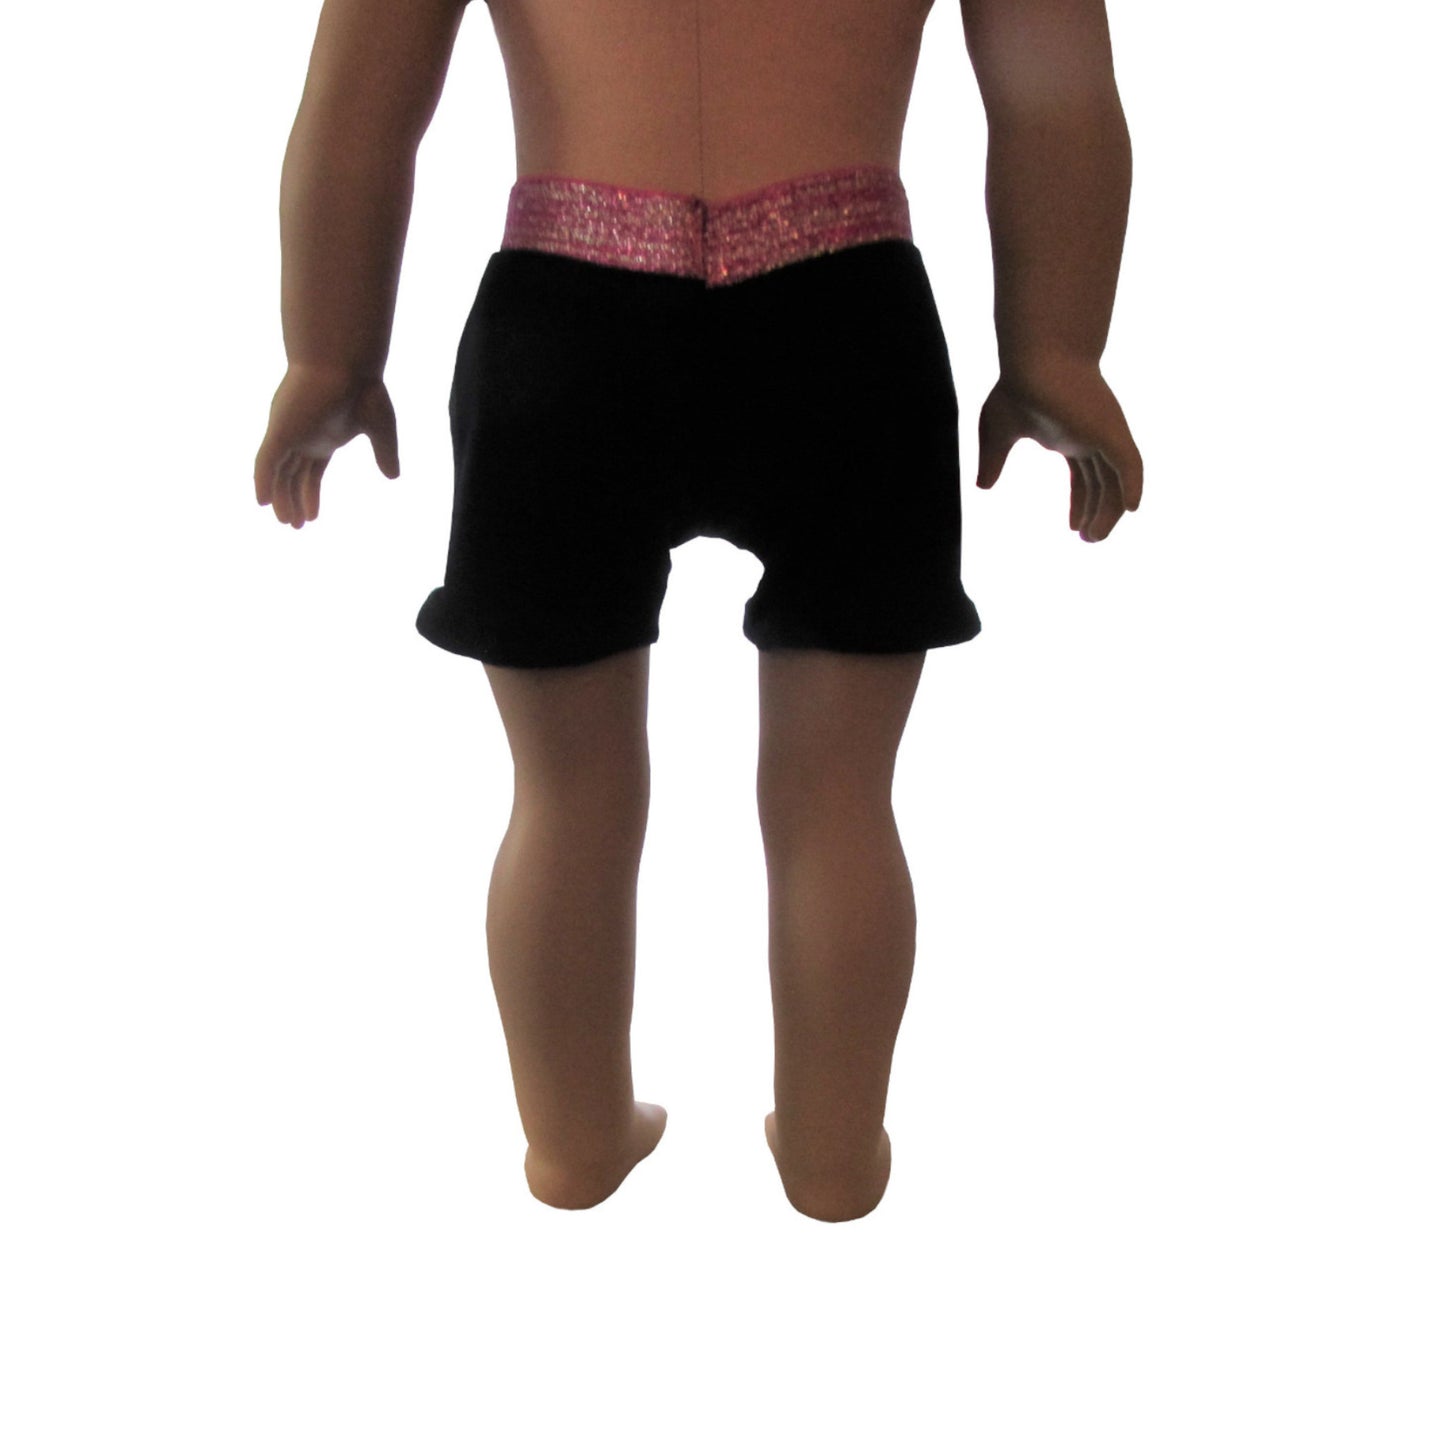 Black Yoga Shorts with Pink Contrast Band for 18-inch dolls